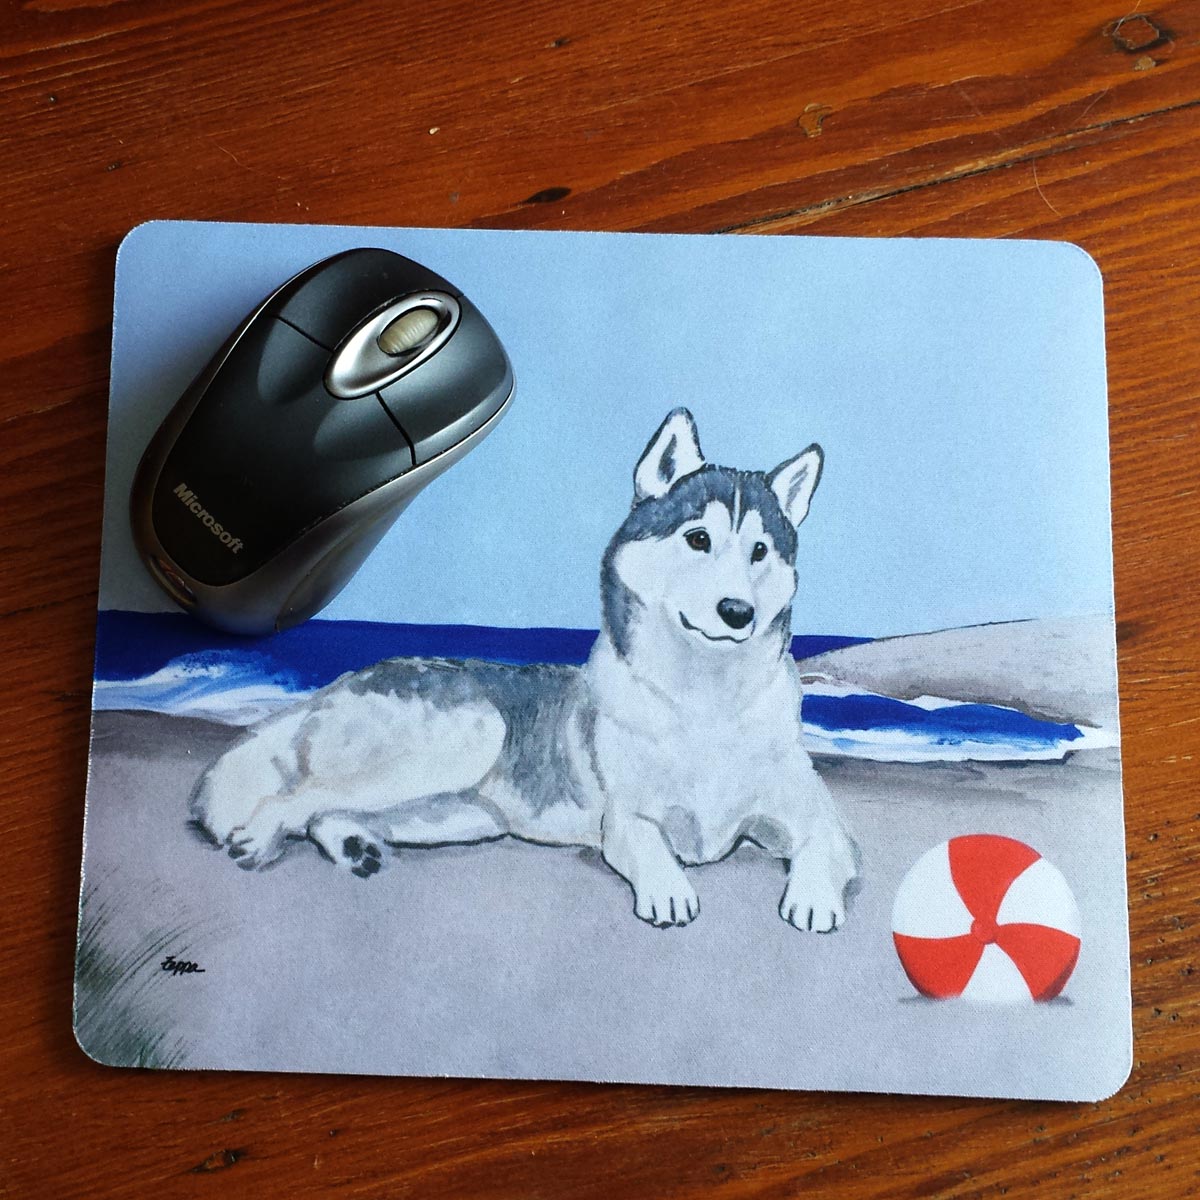 Beach Background Mouse Pad with Siberian Husky